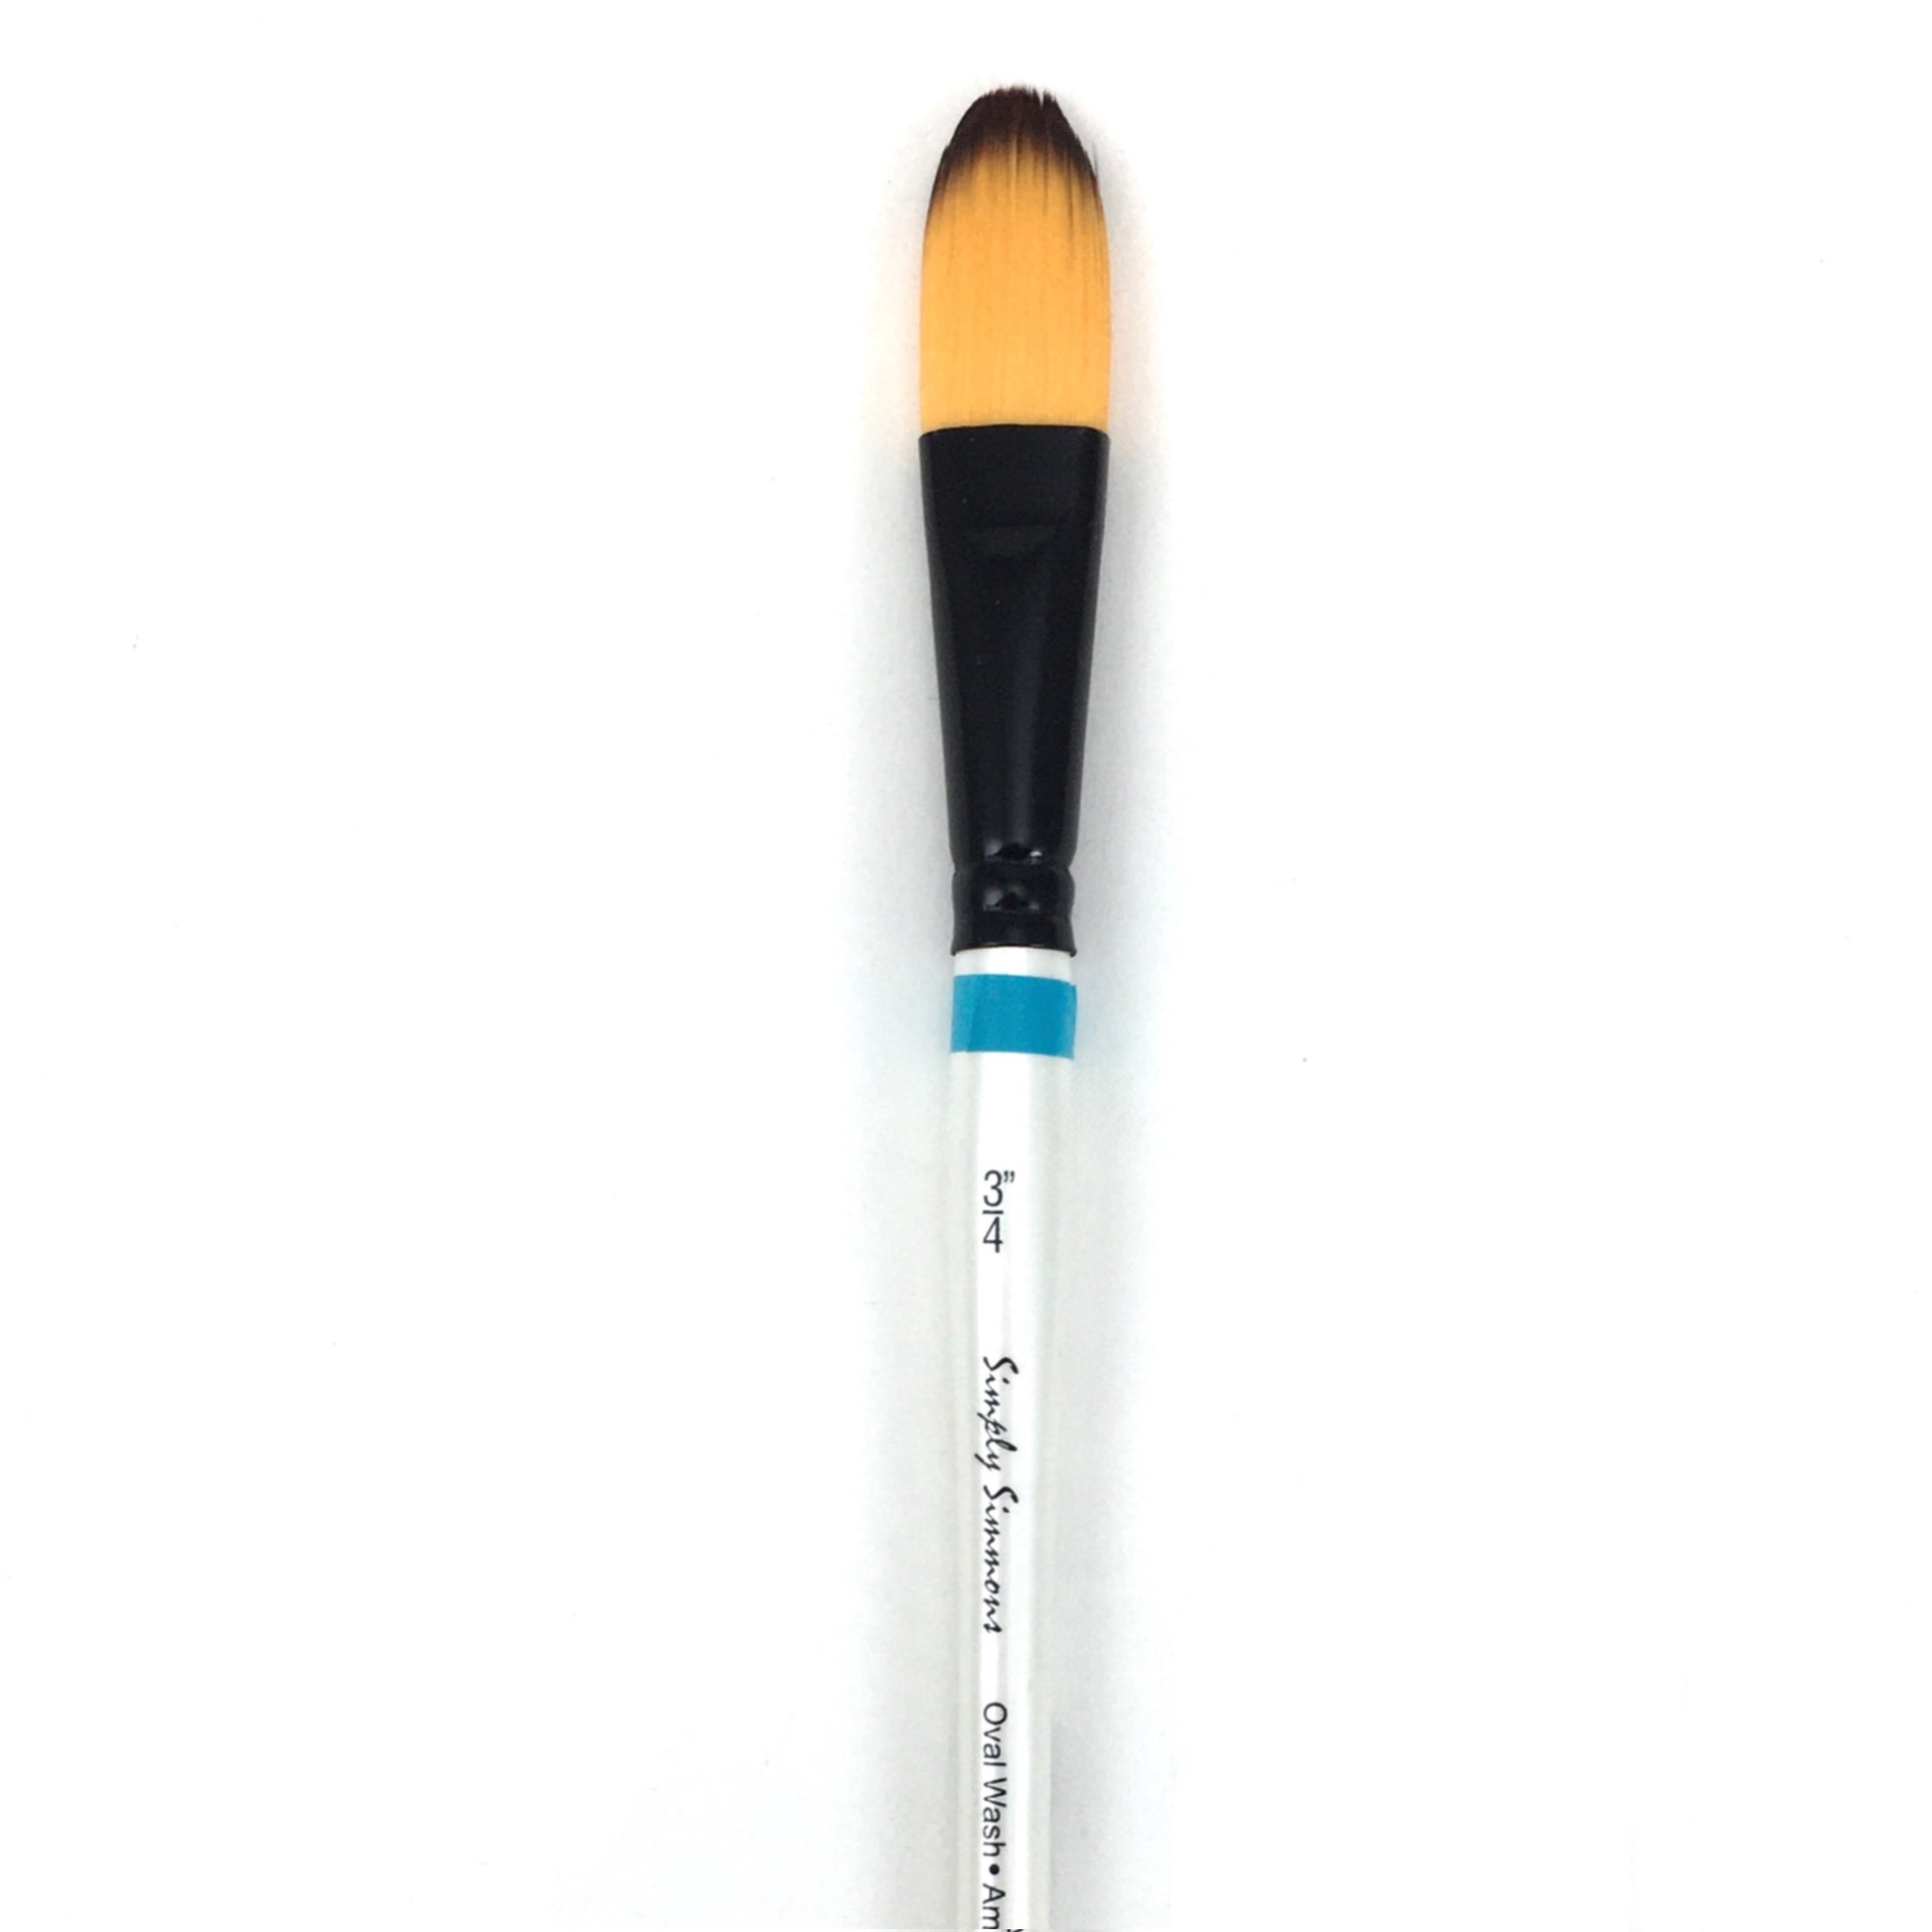 Simply Simmons Watercolor Brush - Short Handle - Oval Wash / - 3/4 inches / - synthetic by Robert Simmons - K. A. Artist Shop